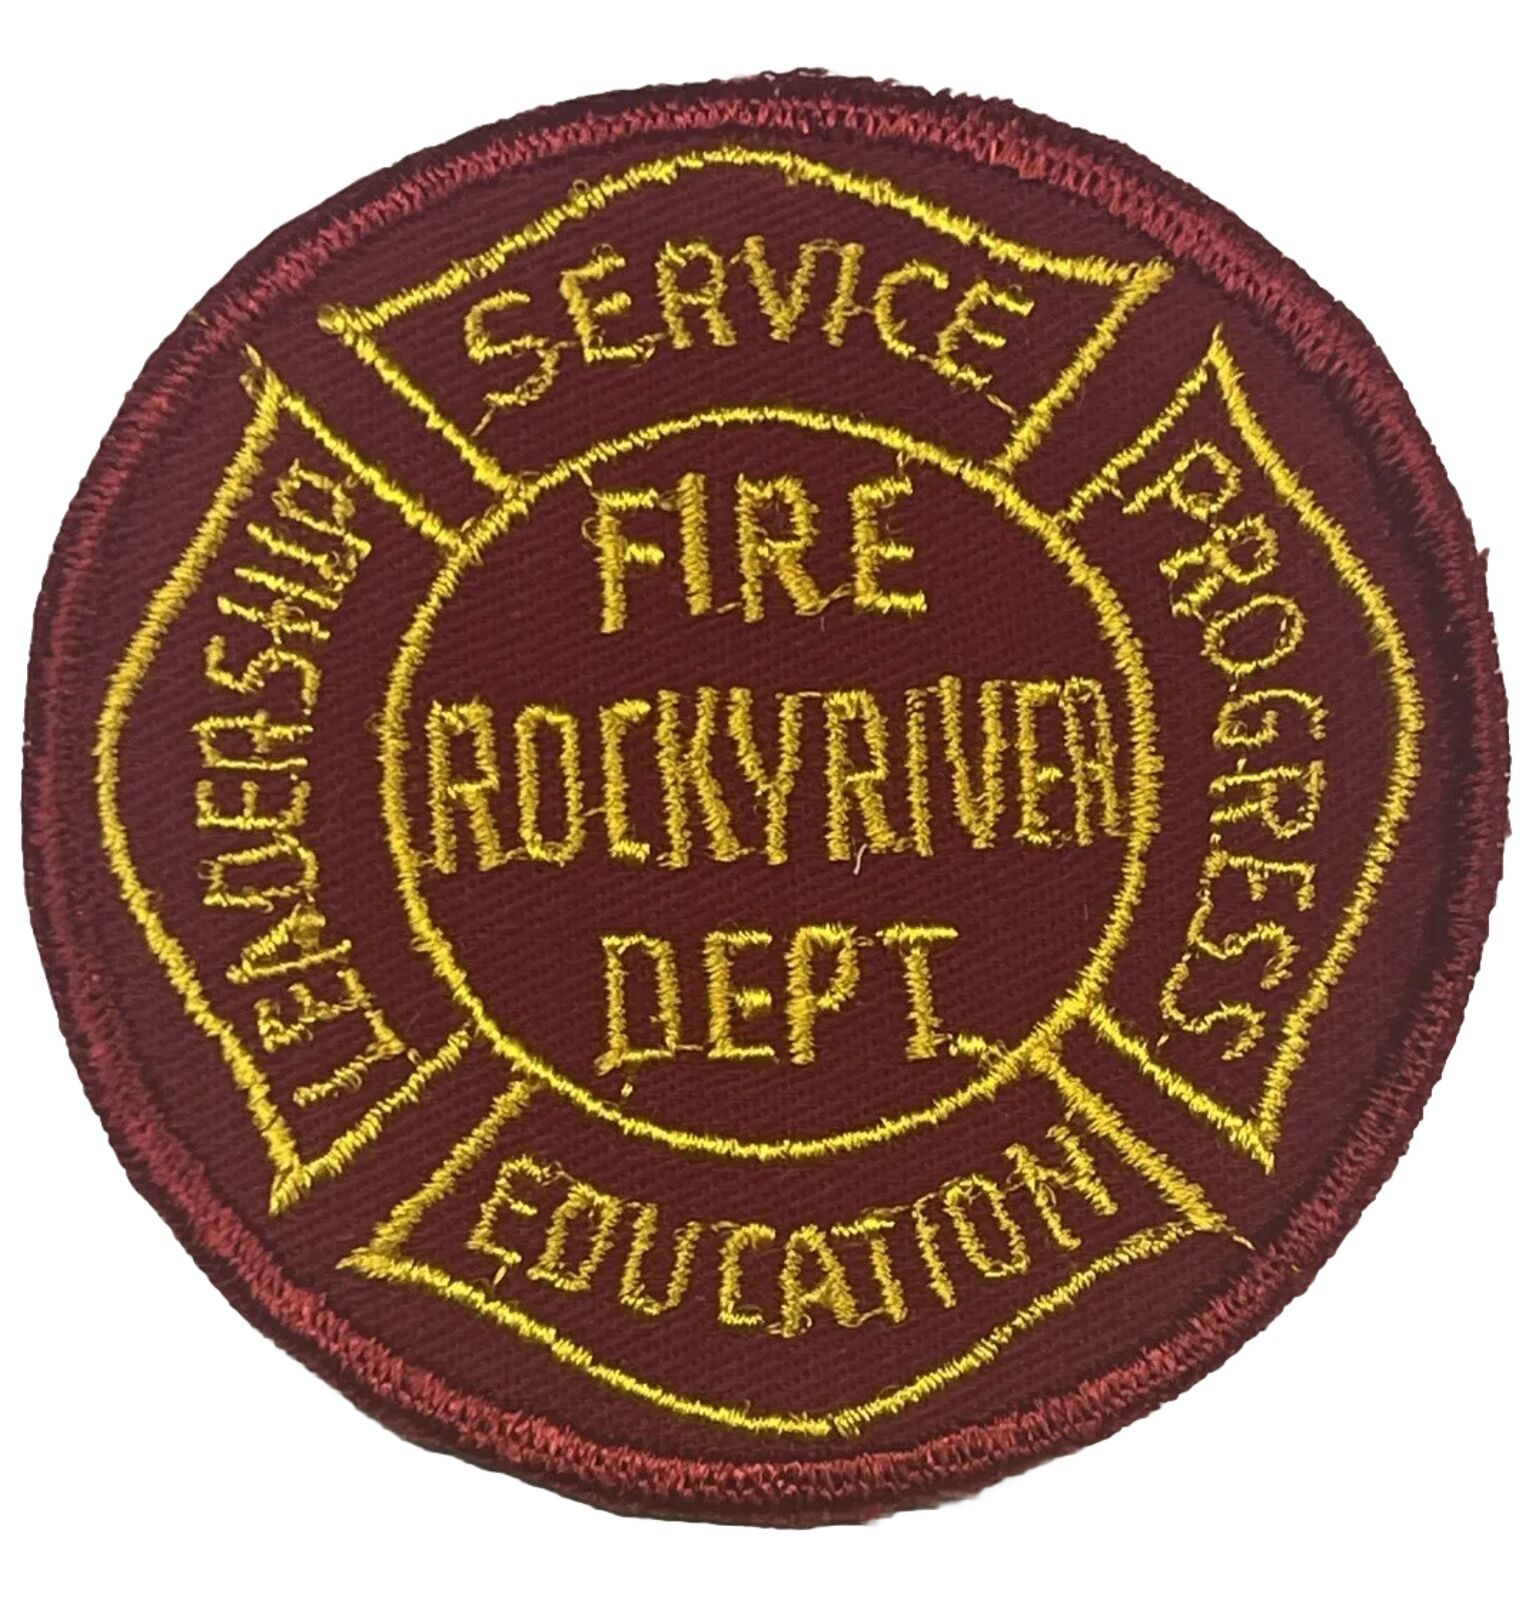 Rocky River Fire Department Patch Ohio Embroidered Service Badge Emblem Memento